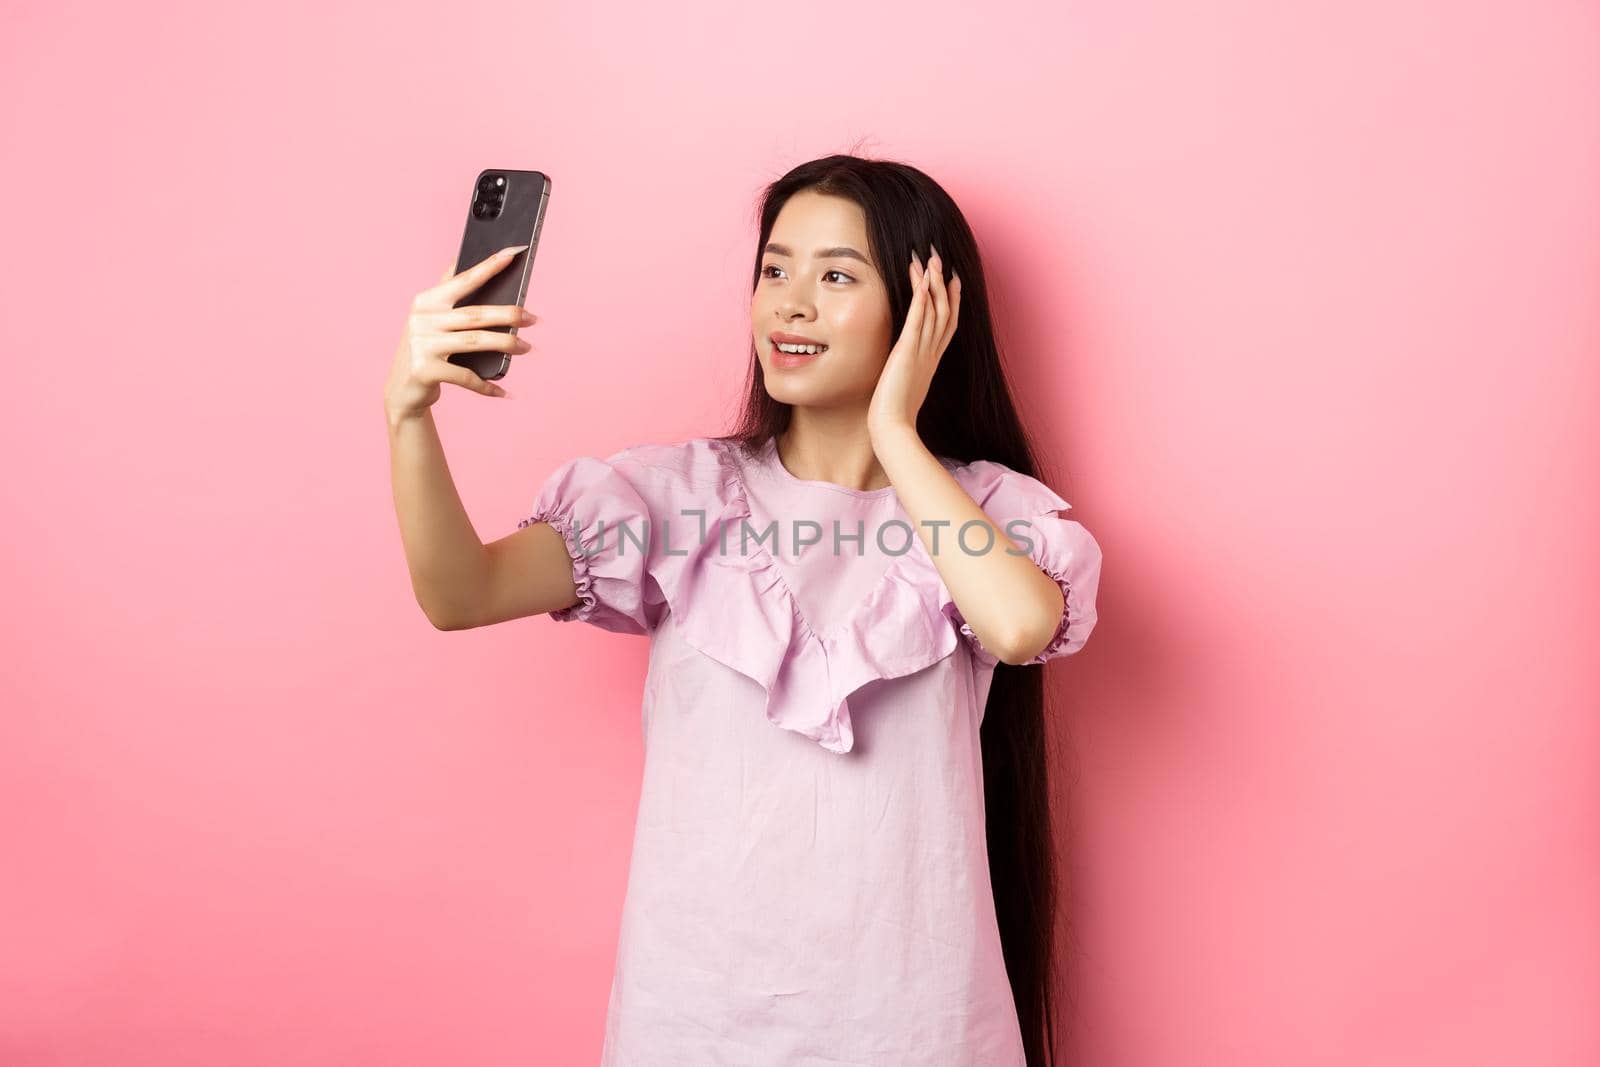 Stylish asian girl blogger taking selfie on mobile phone, posing for smartphone photo, standing in dress against pink background.